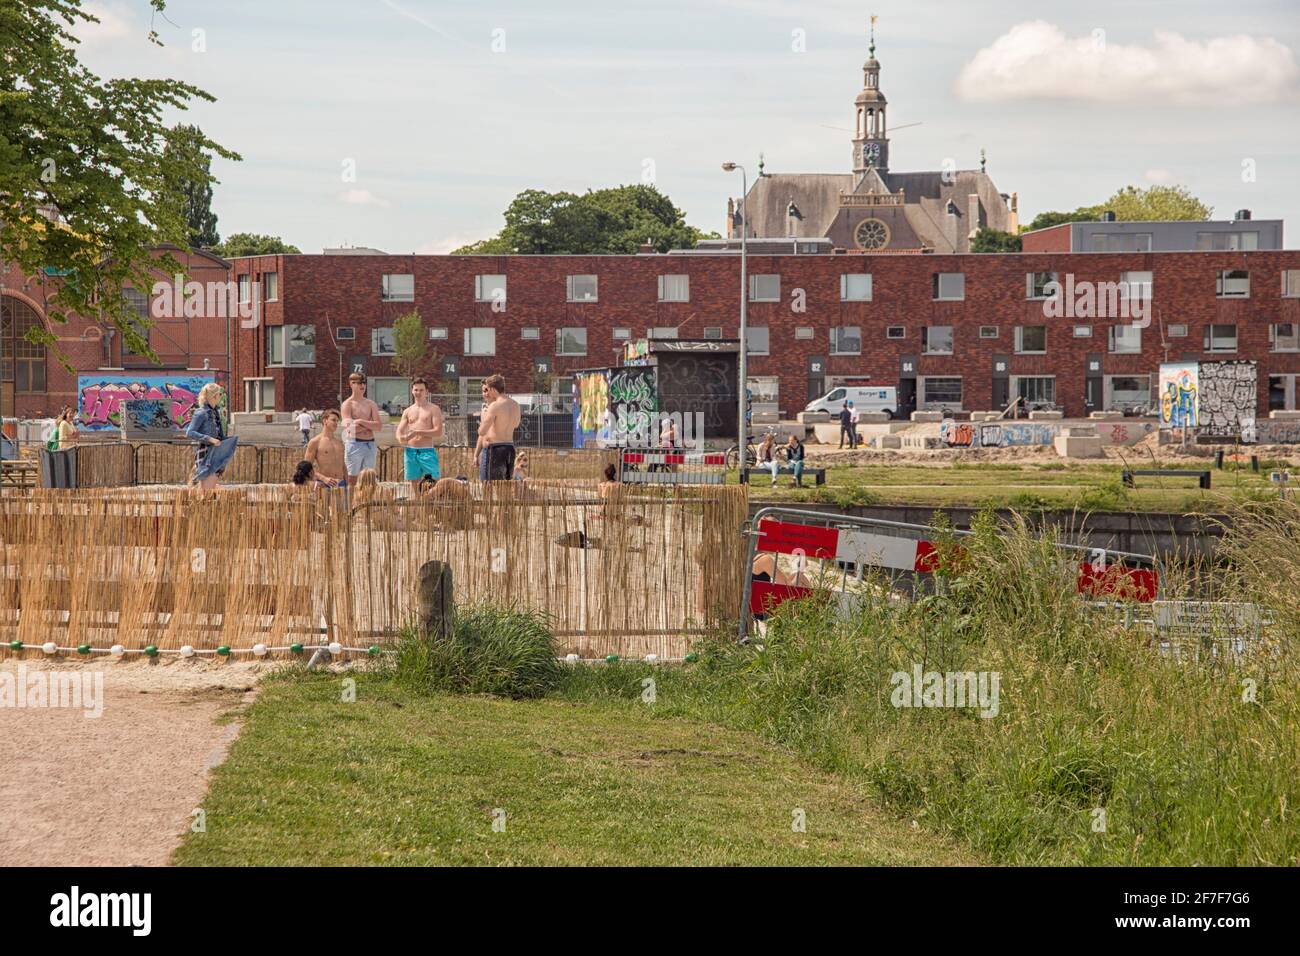 Young people on an urban beach in Groningen, The Netherlands Stock Photo